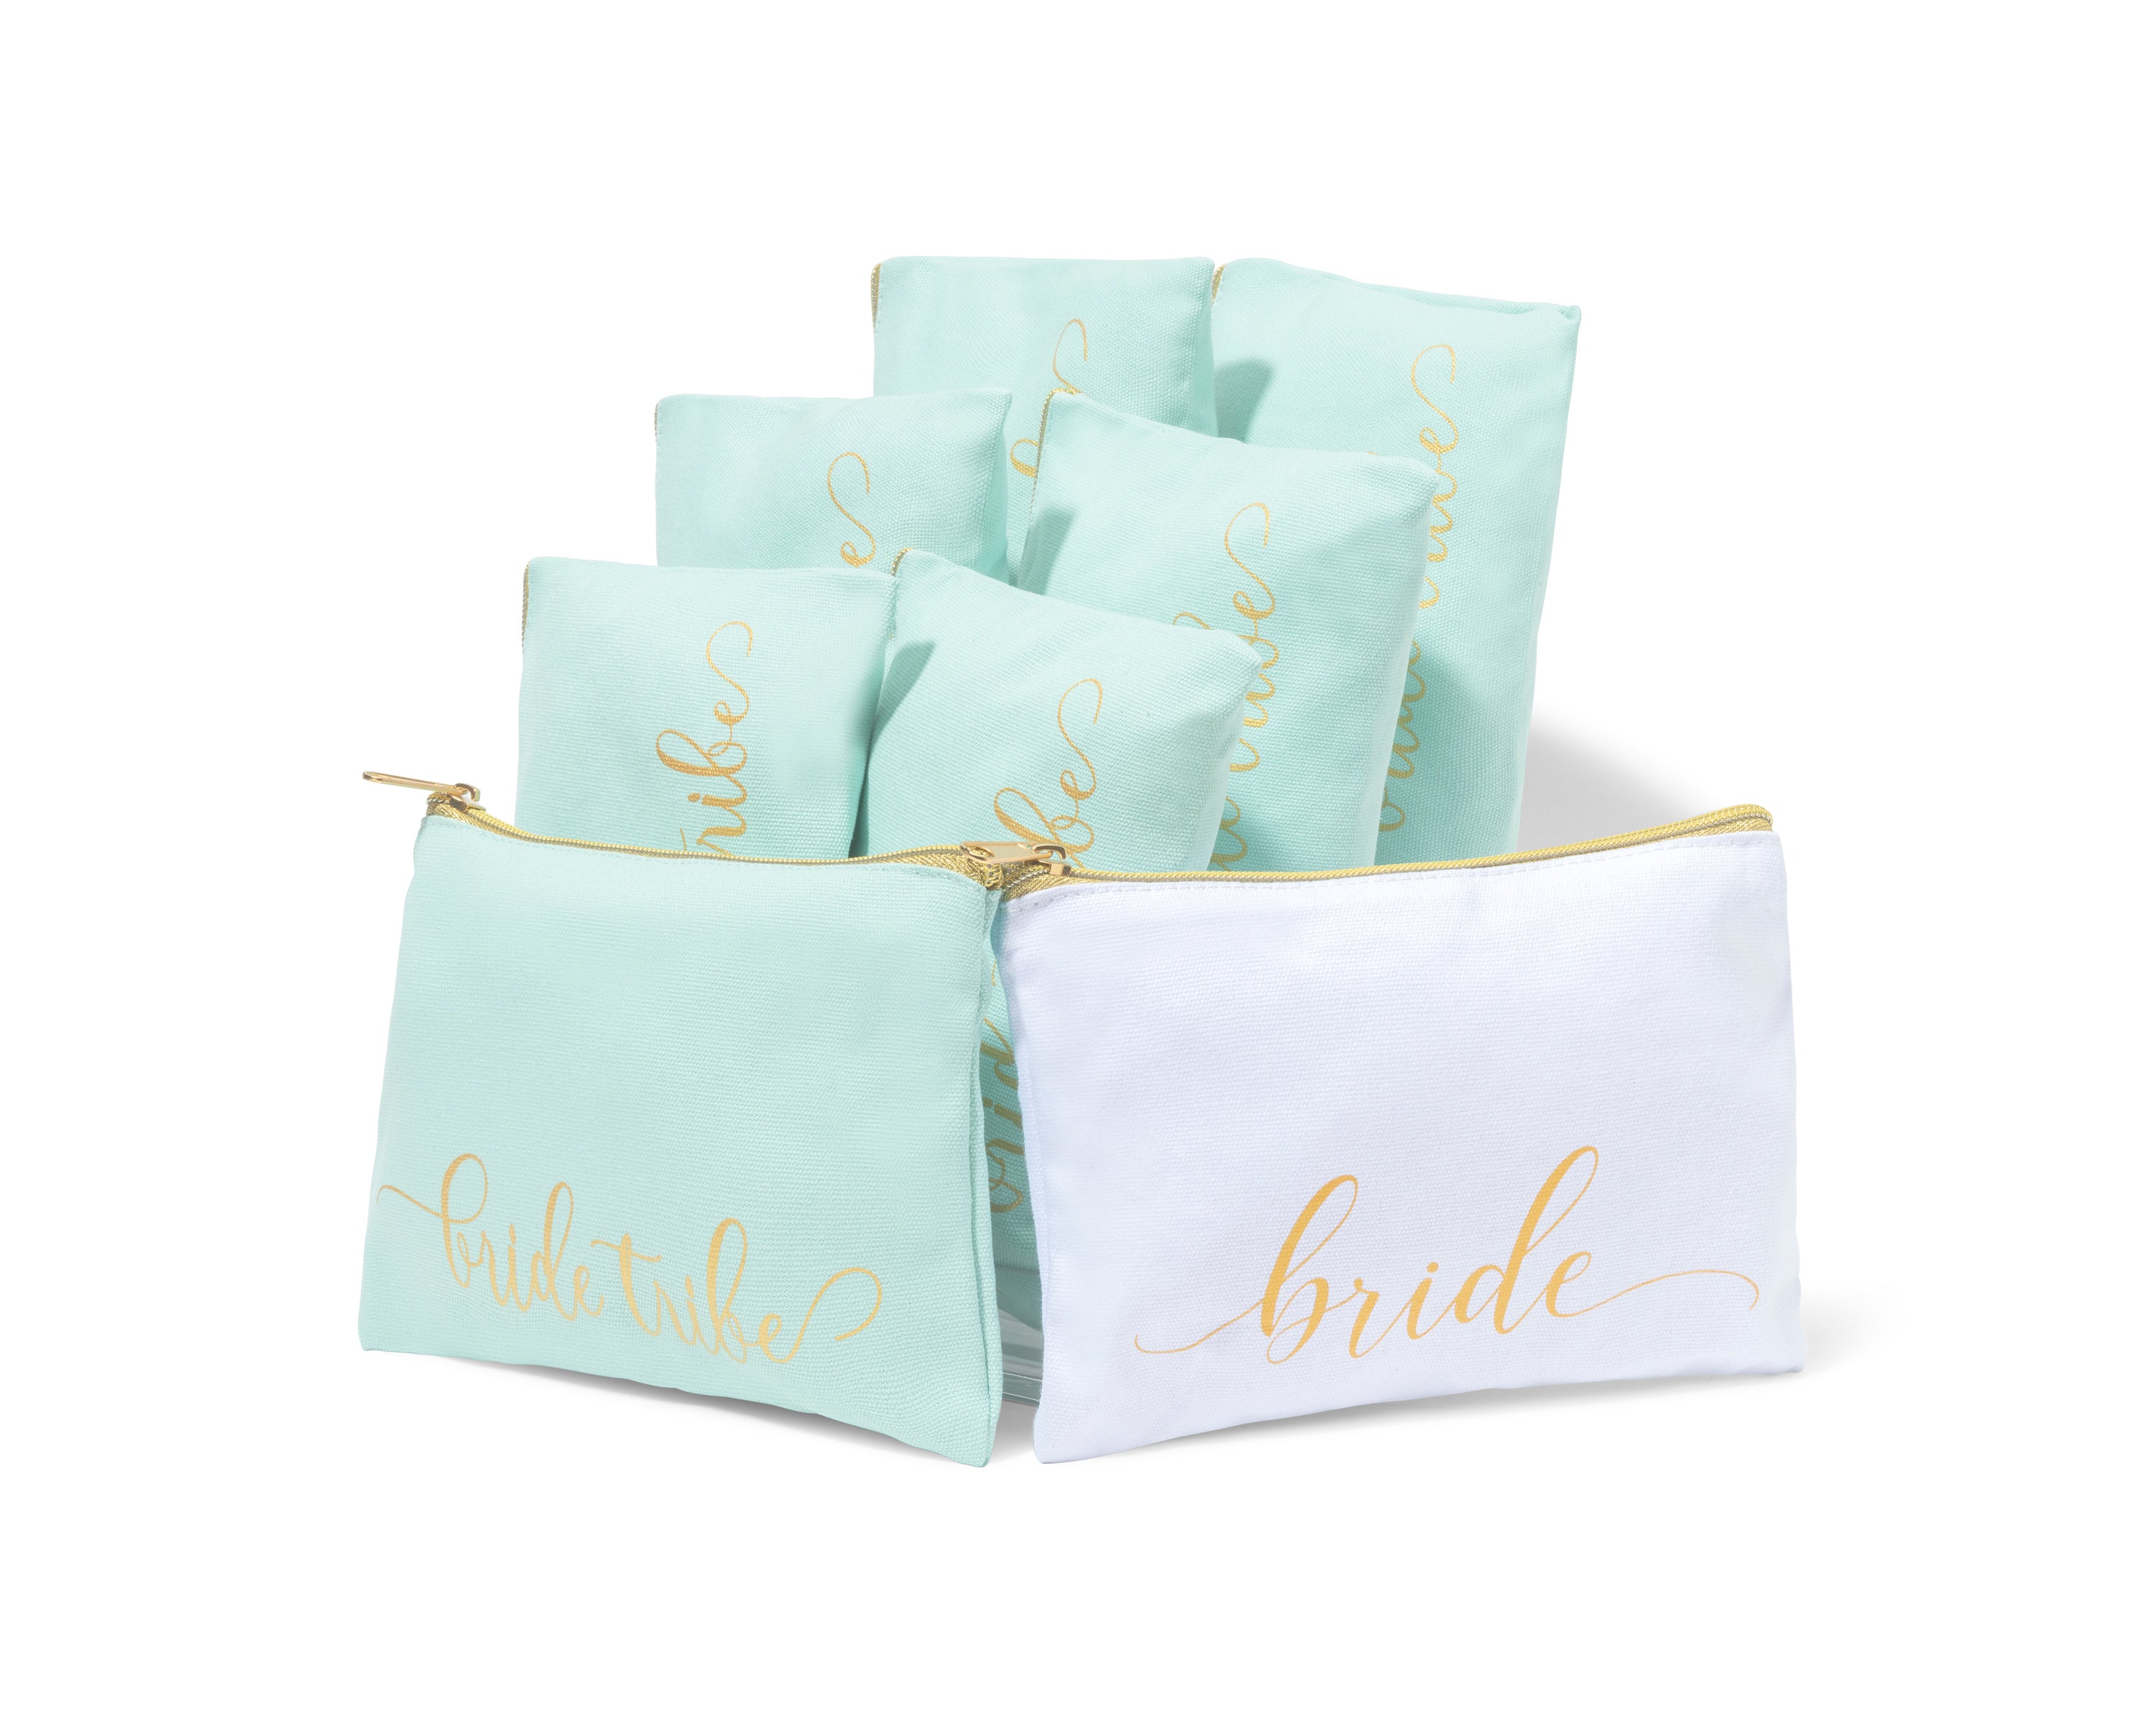 Bride Tribe Bridesmaid Canvas Makeup Bags Cosmetic Clutch (Turquoise) | 8 Piece Set